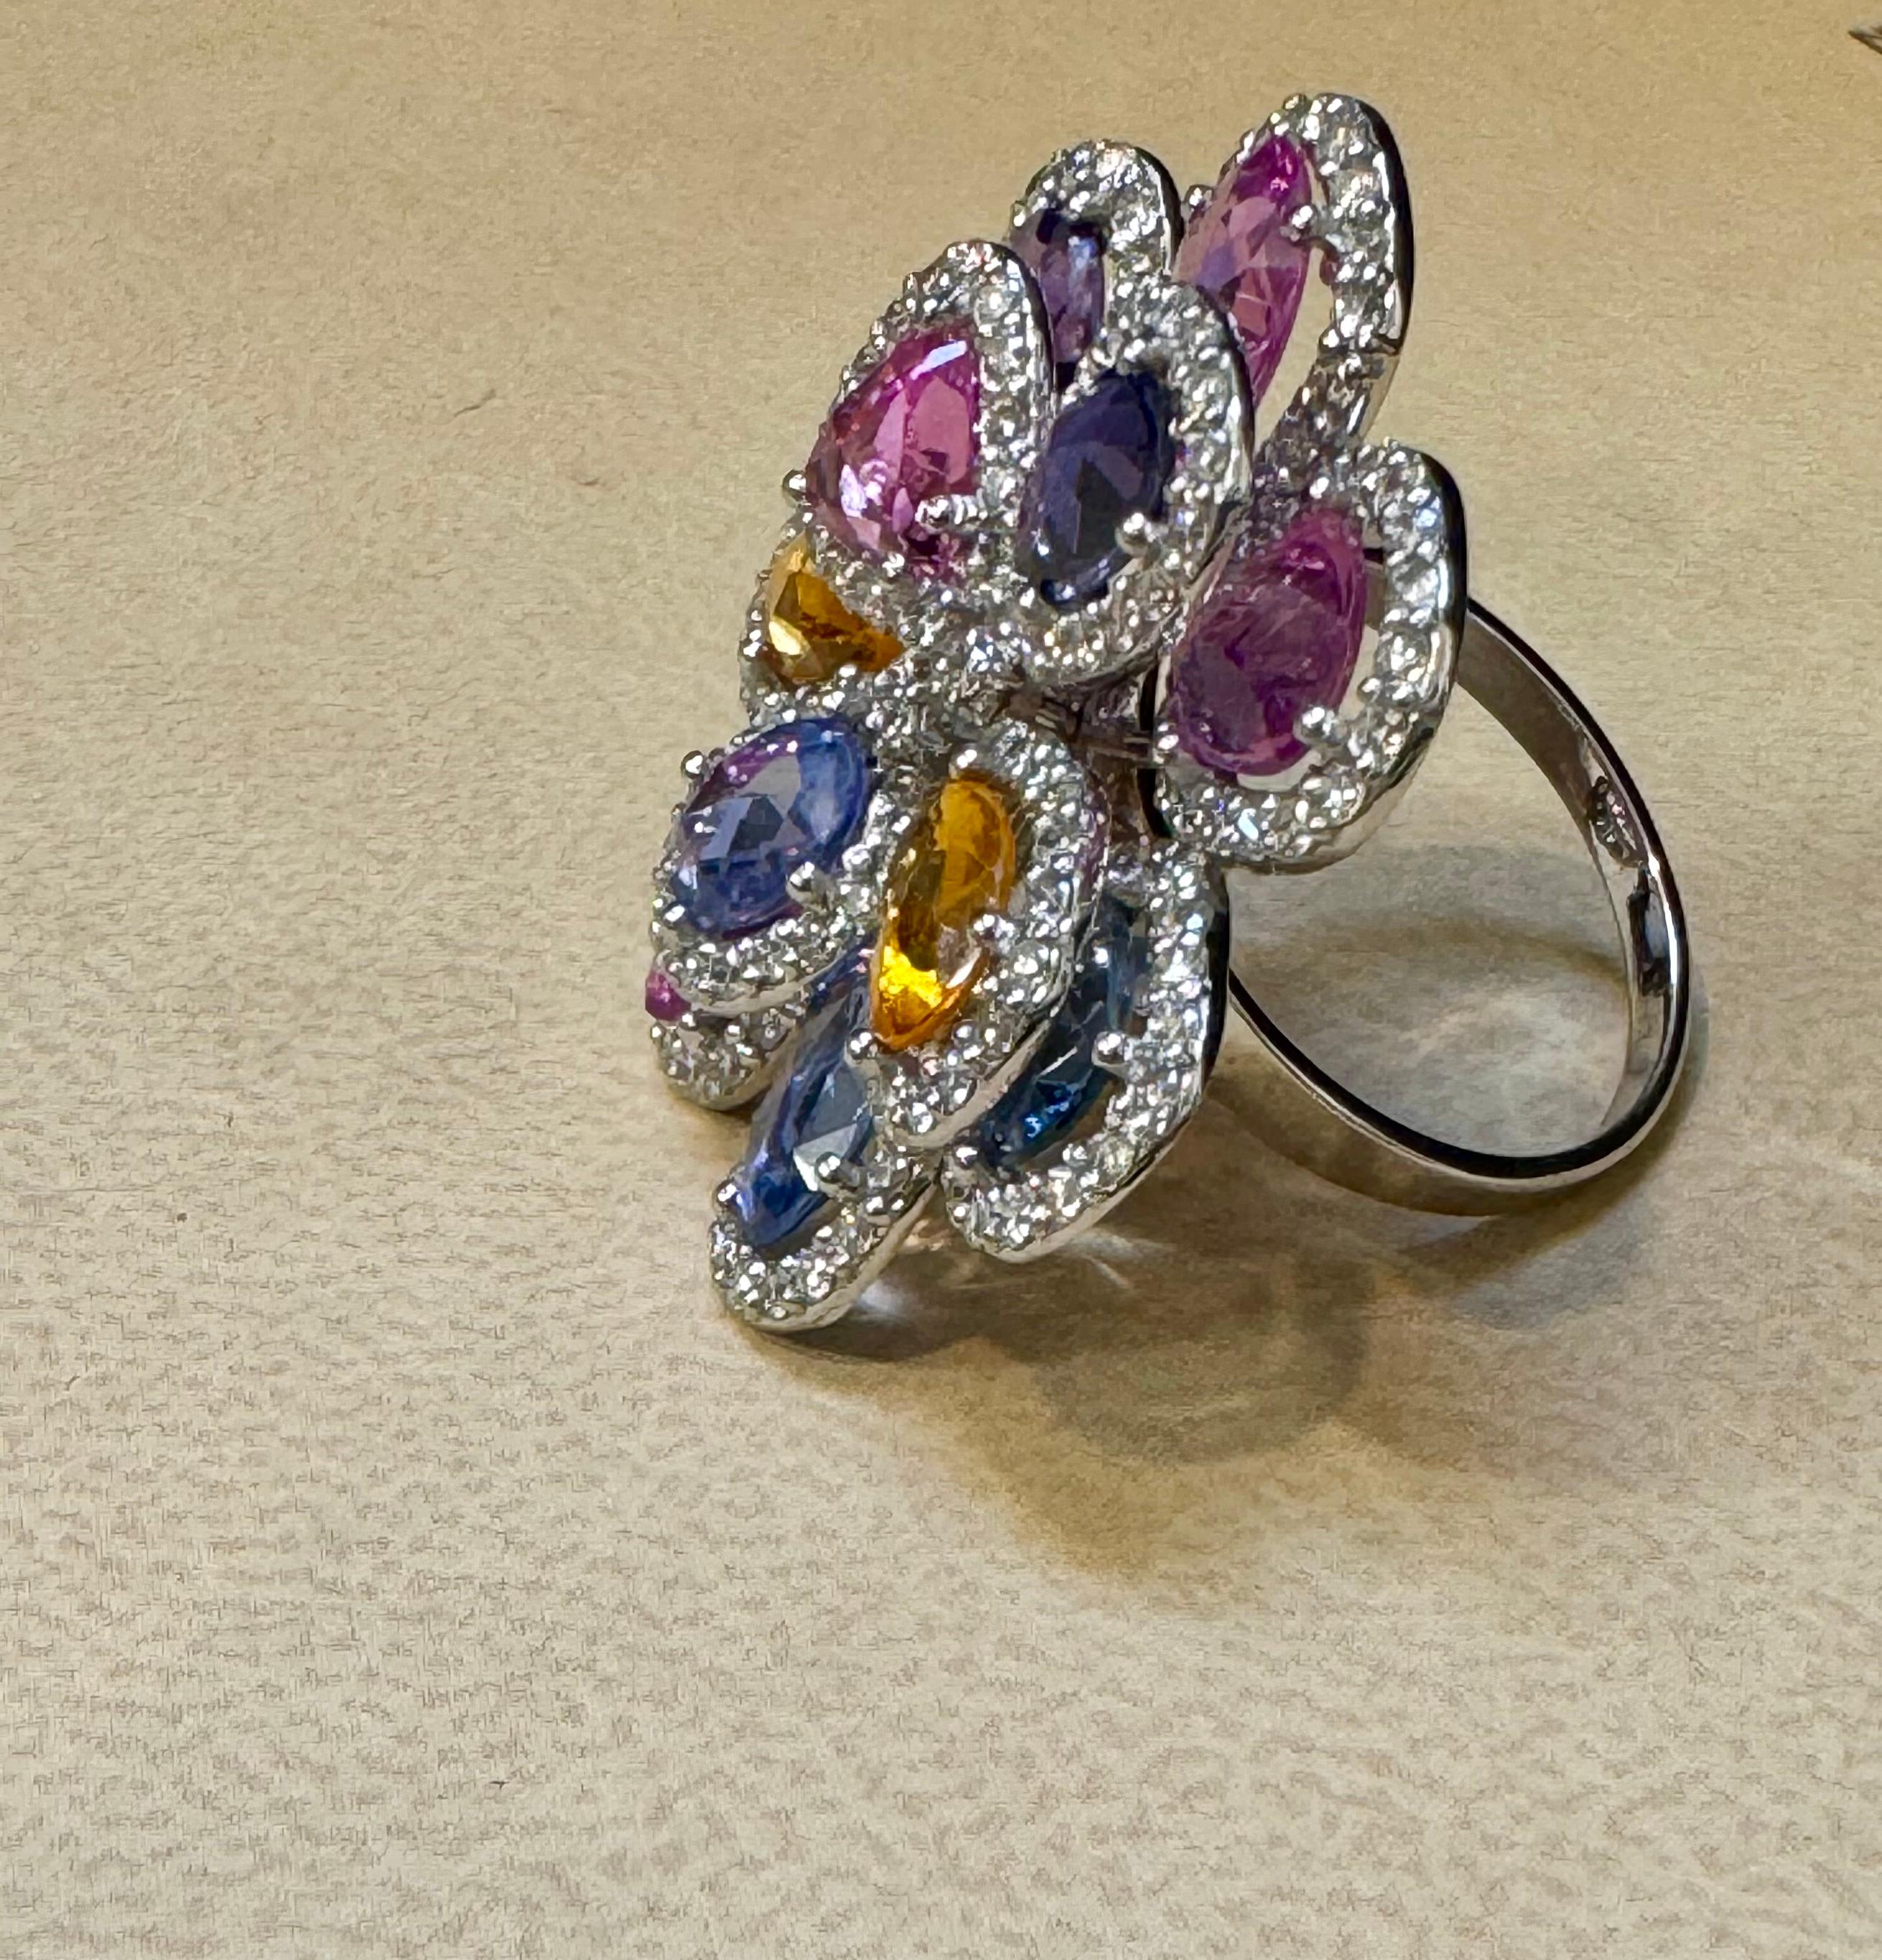 11 Ct Fine Multi Sapphire & 3 Ct Diamond Cocktail Flower Ring in 18 Kt Gold  6.5

18 Karat yellow Gold 10.5  Grams
Approximately 11  Ct Natural  Sapphire  , Pink, Purple , Blue & Orange Sapphires, 
Big sapphires are used ,  each one of them is close